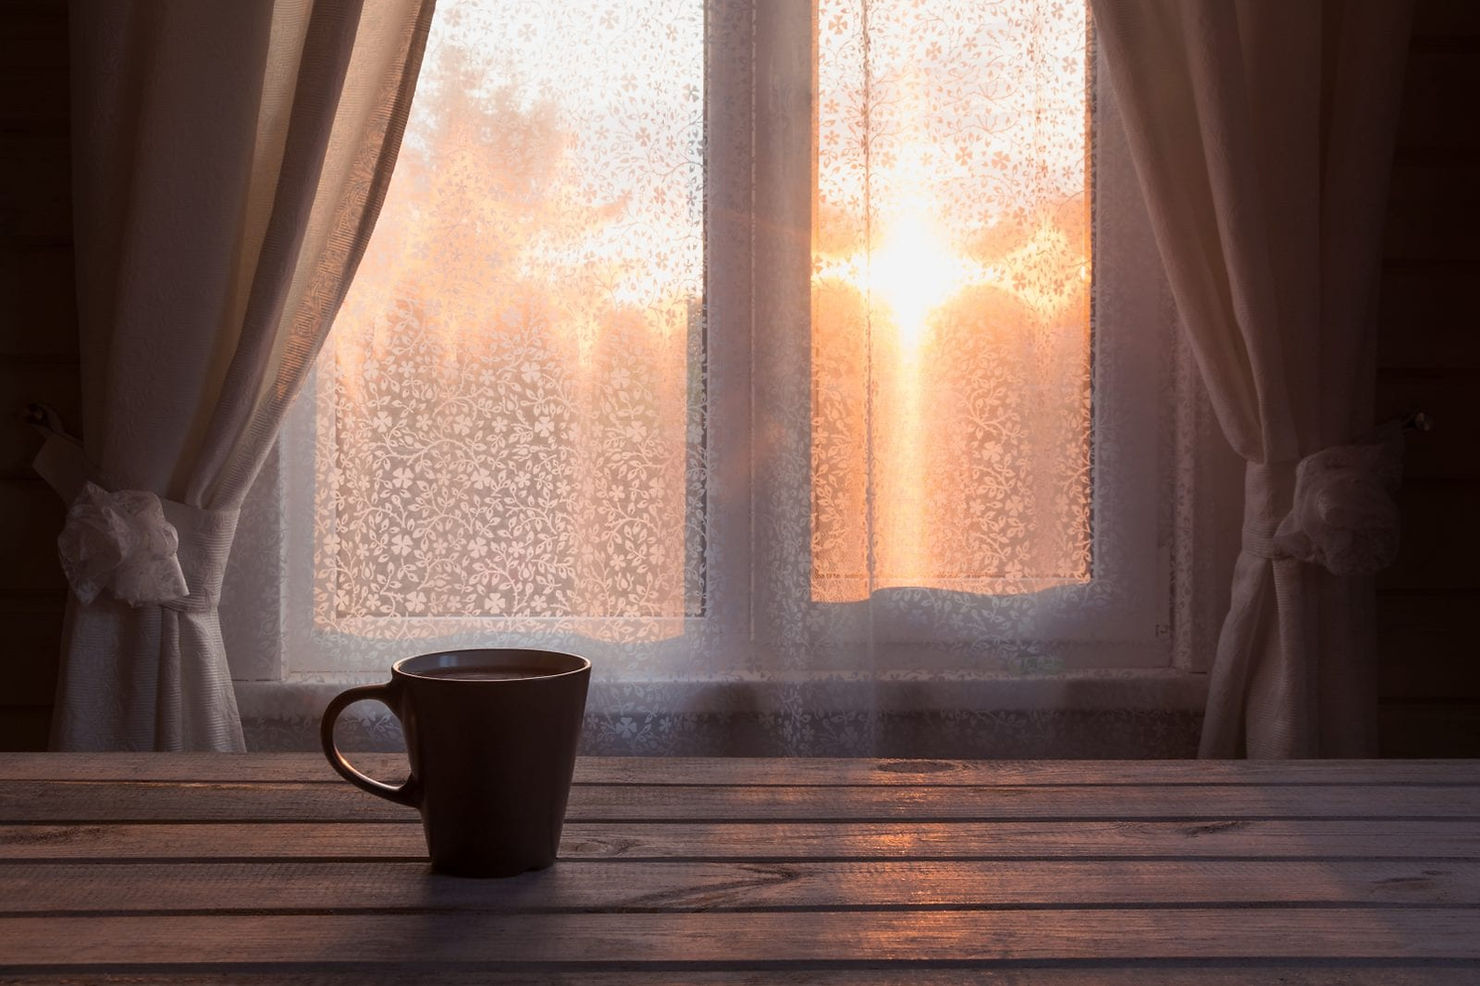 Cup of coffee by a window at sunrise